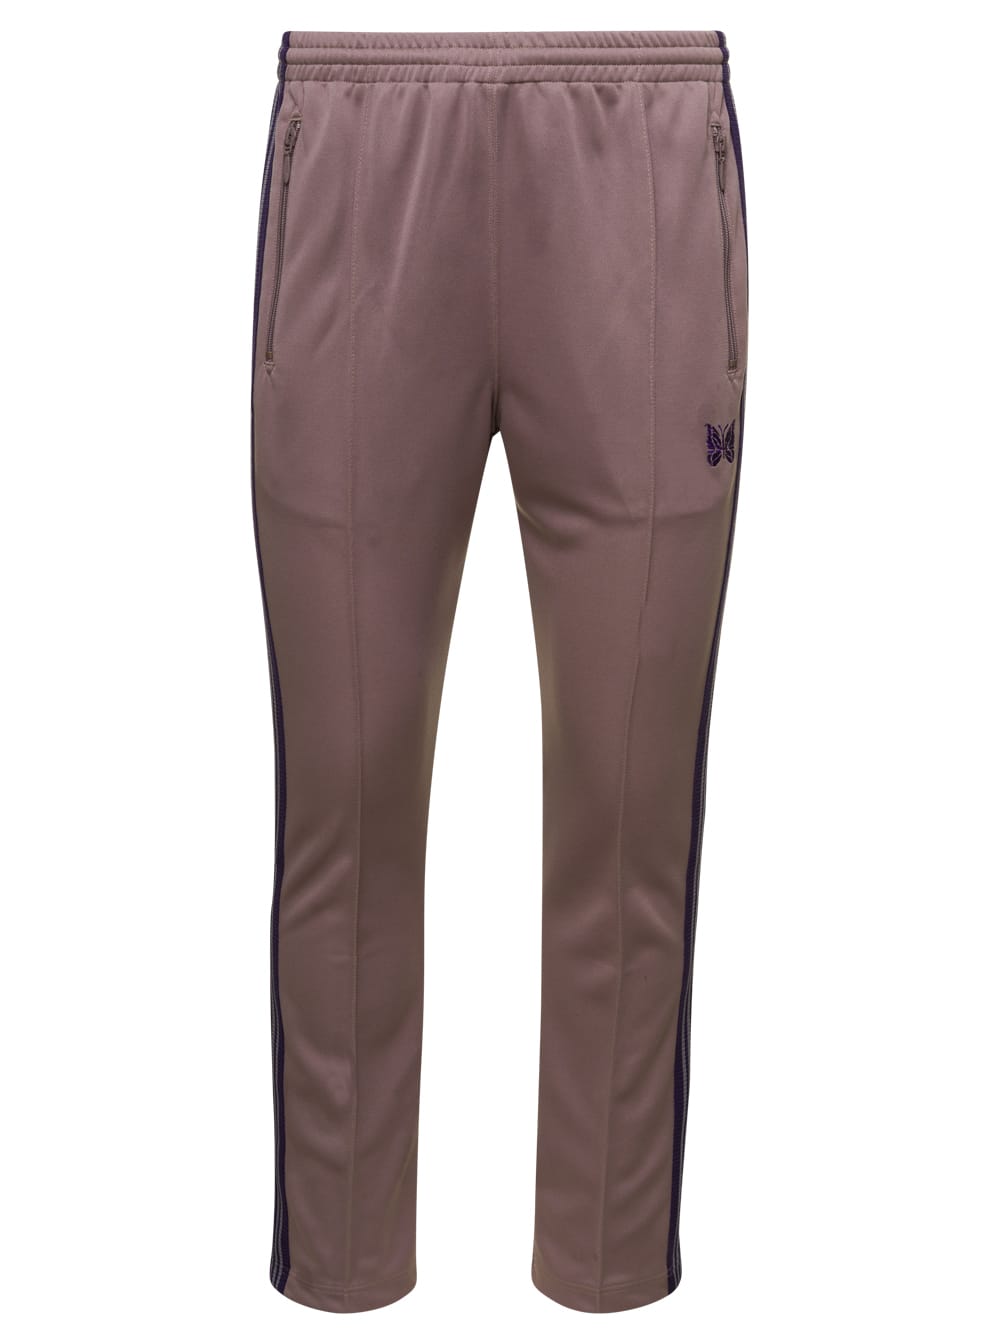 Needles Taupe Track Pants With Side Stripes Detailing Man Needles